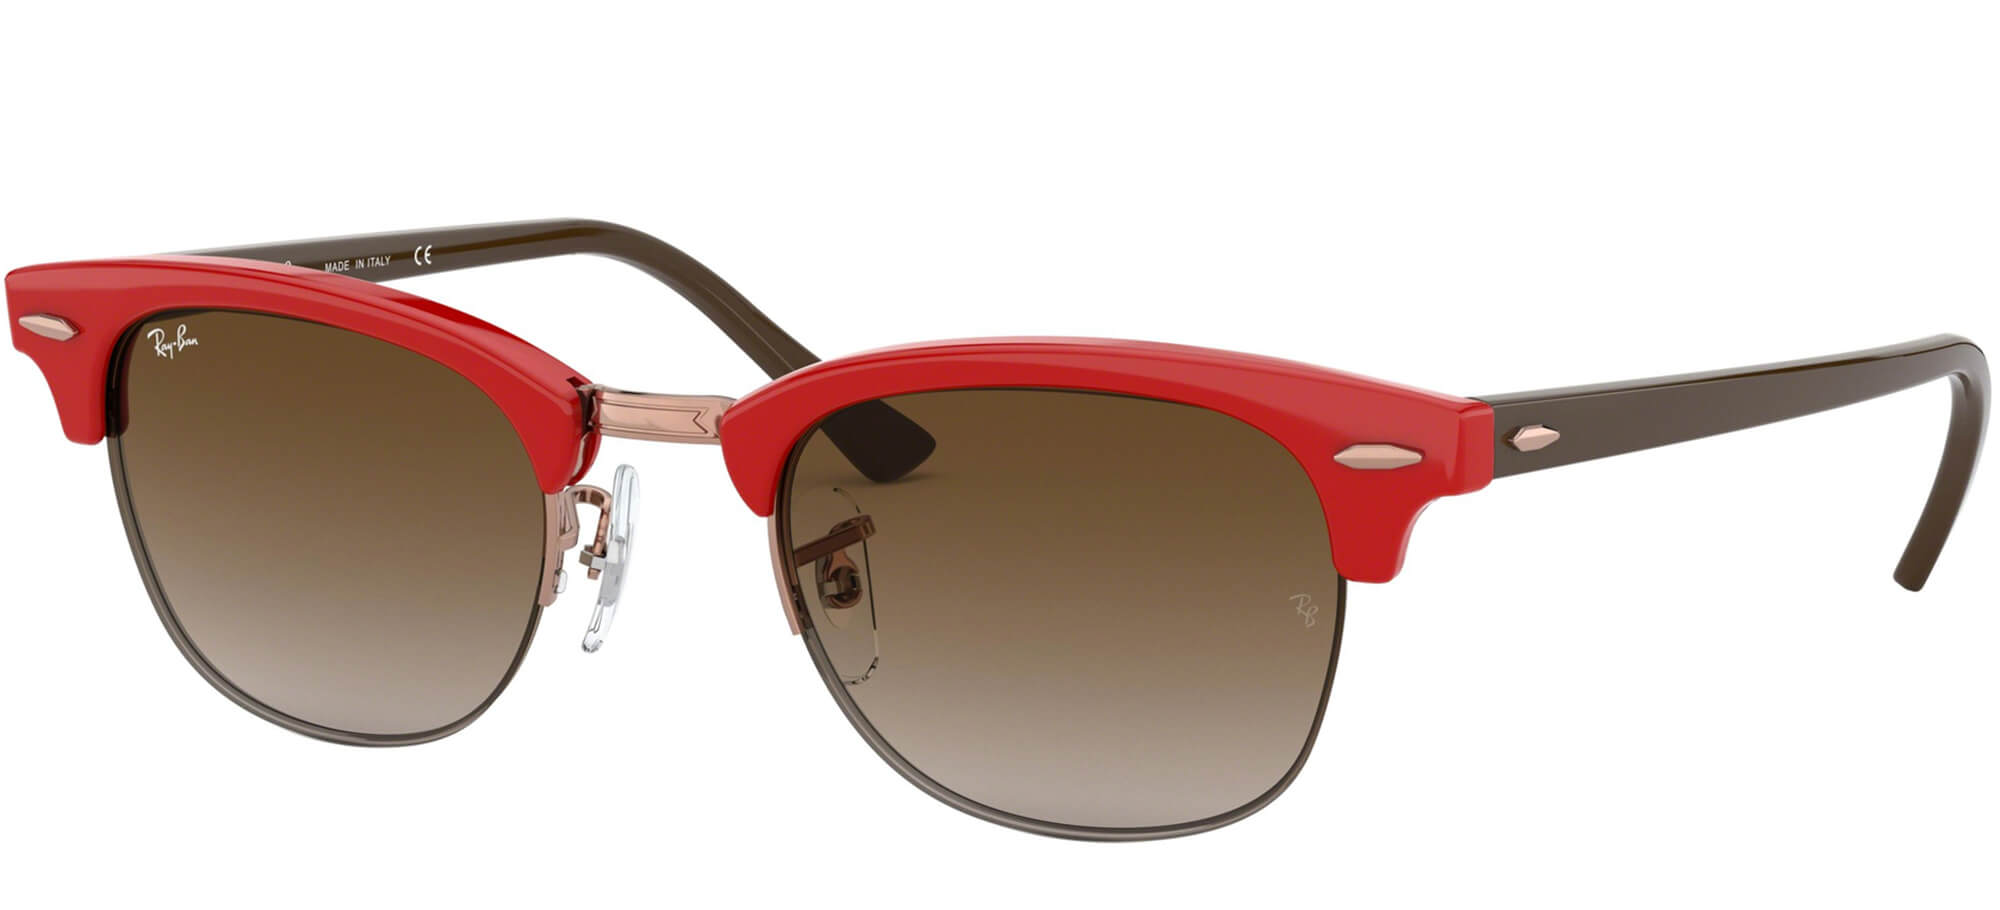 Ray-BanRB 4354Red/brown Shaded (6423/13)